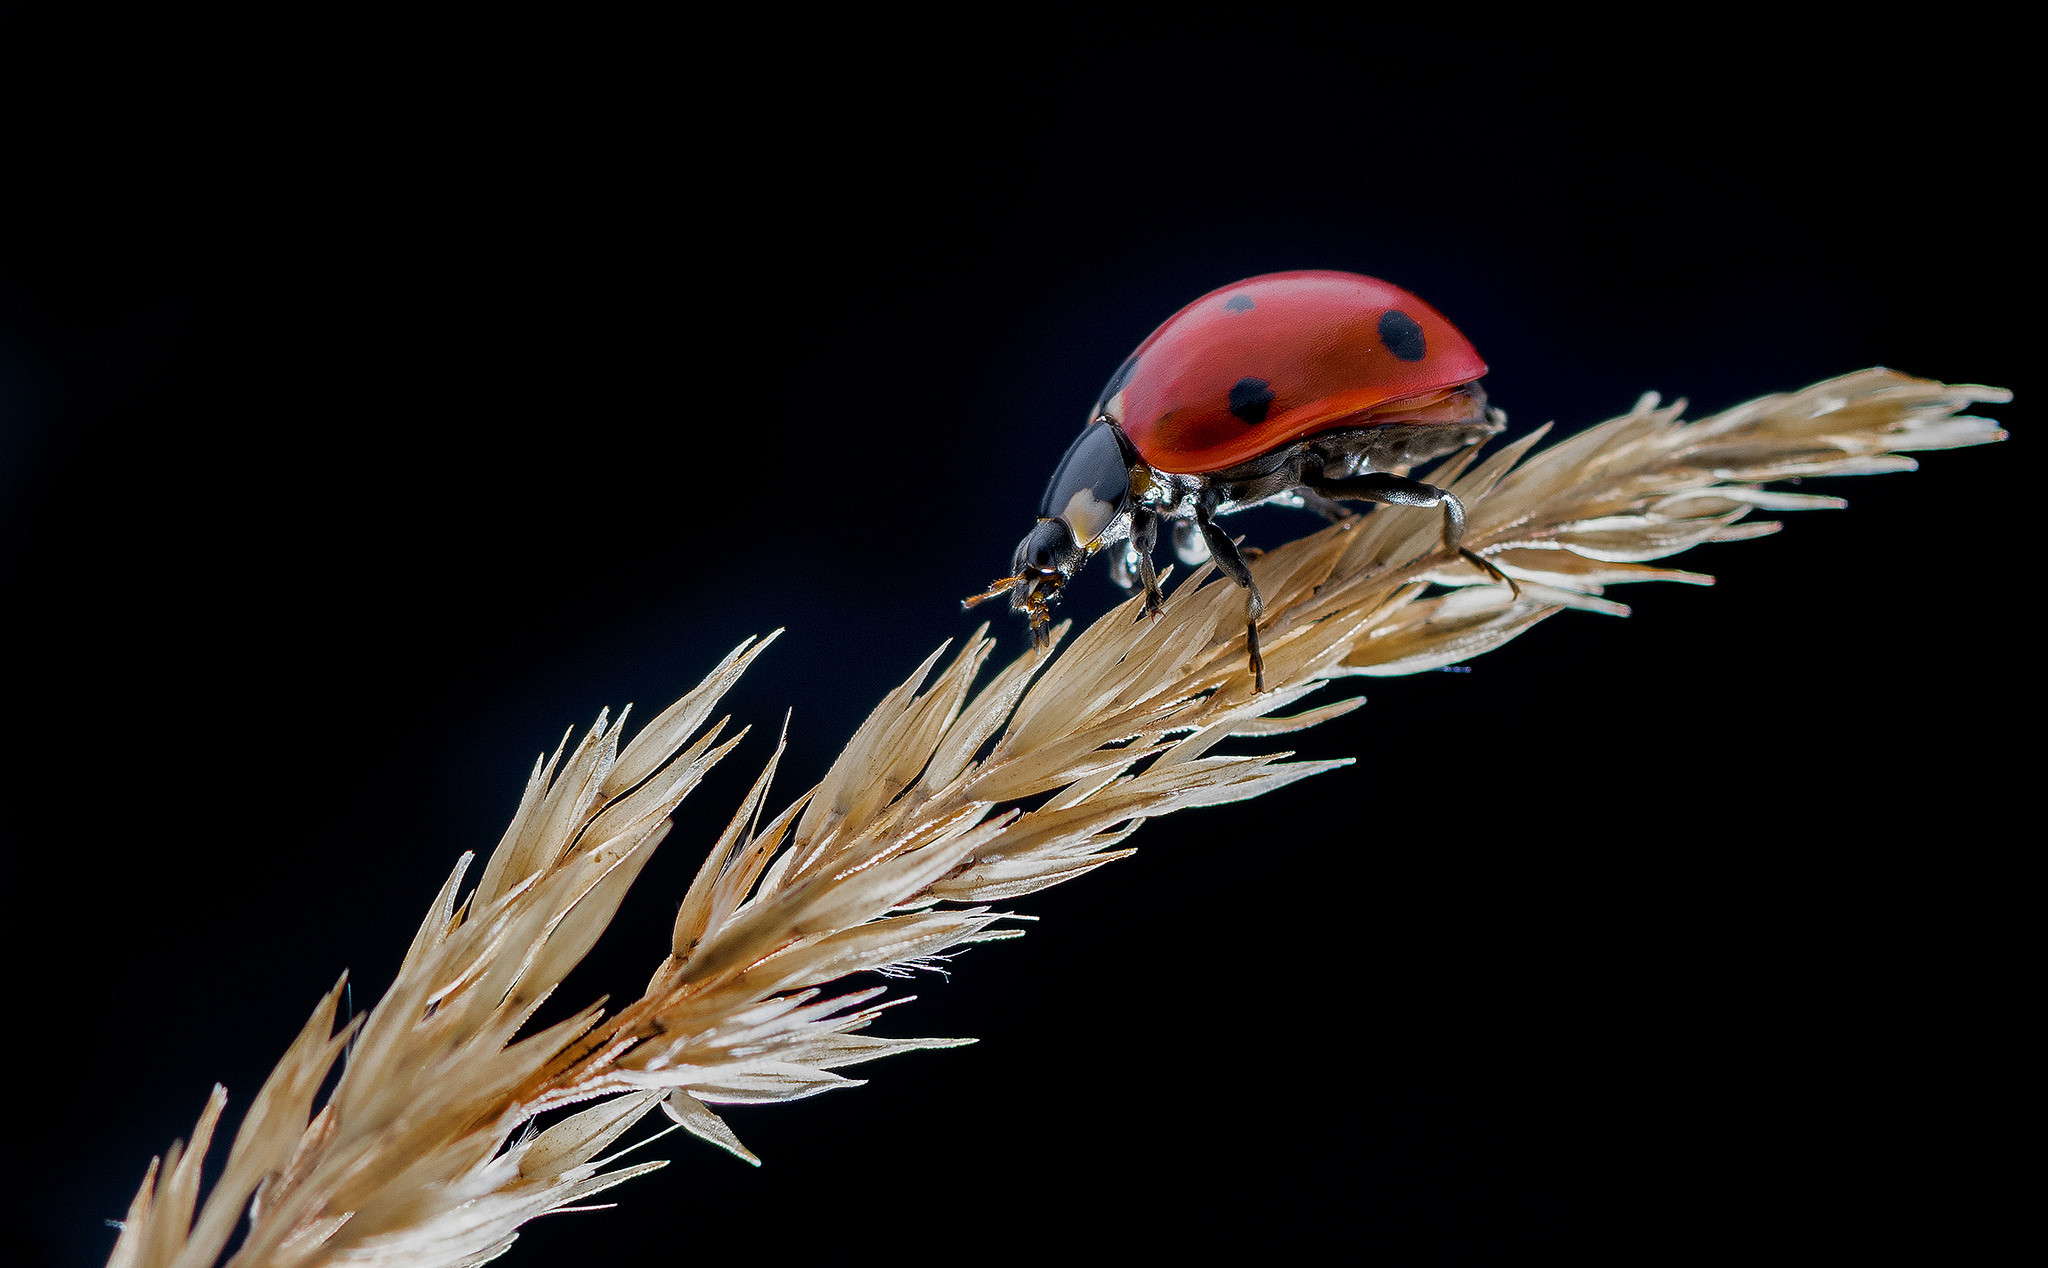 Wallpapers blade of grass branches close-up ladybird on the desktop